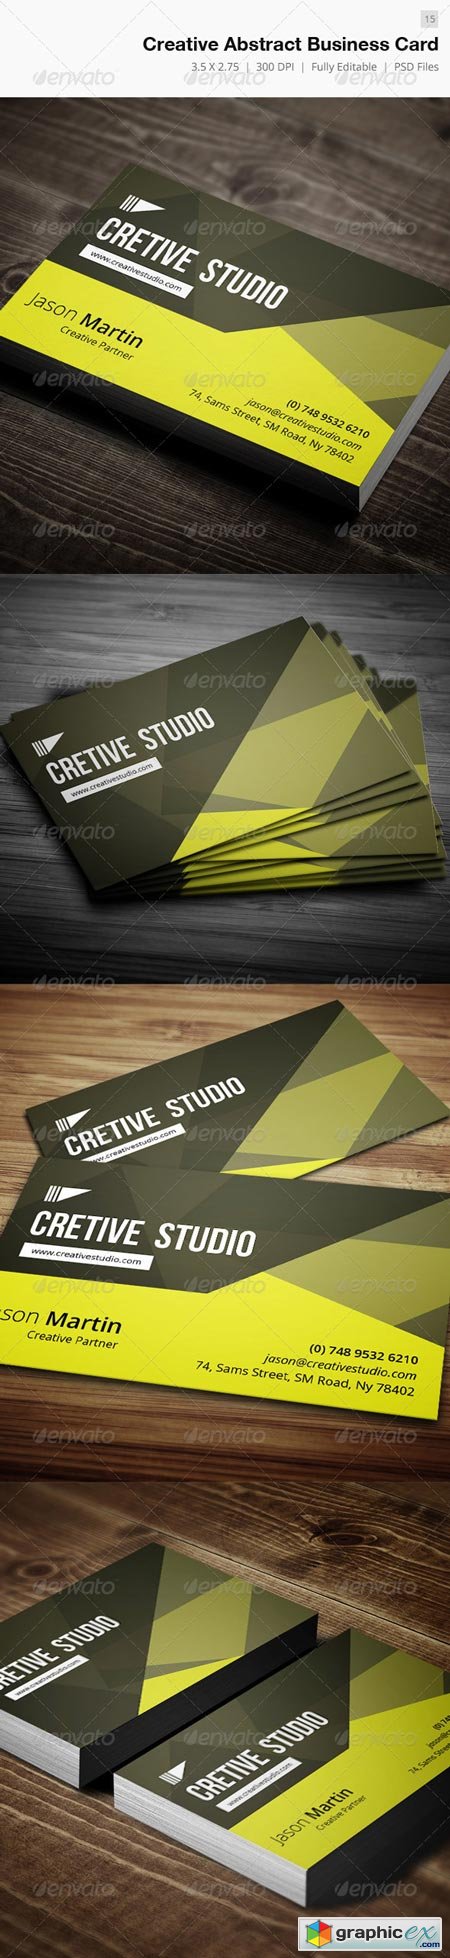 Creative Abstract Business Card - 15 4587639